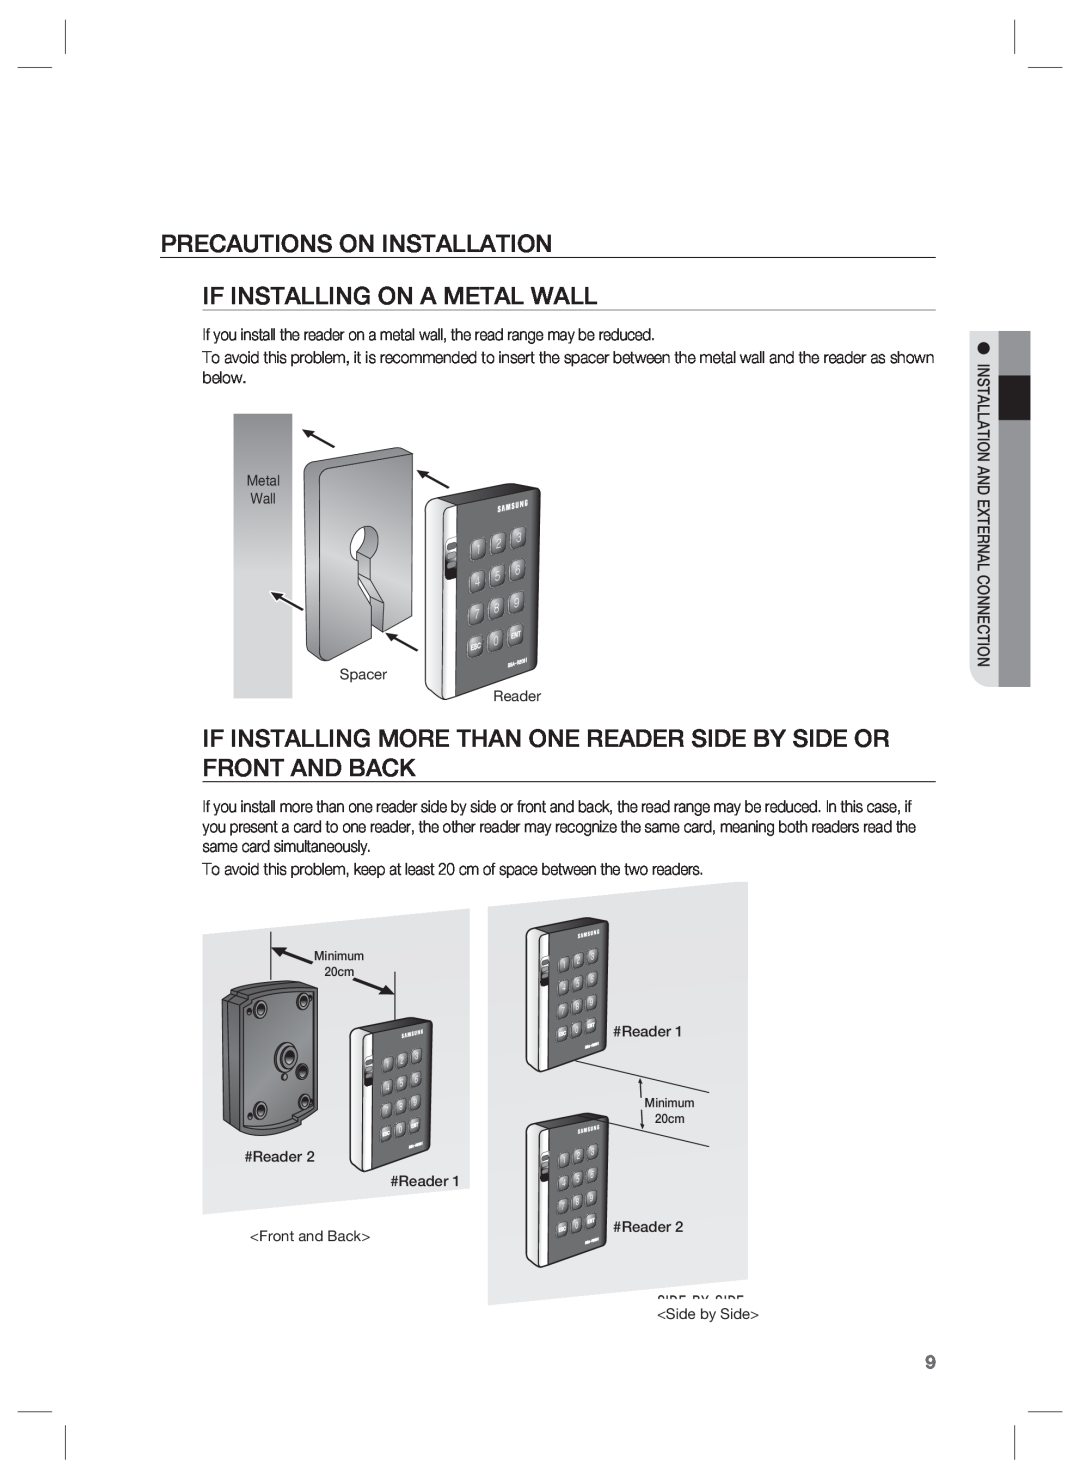 Samsung SSA-R2001 user manual Precautions On Installation, If Installing On A Metal Wall, Spacer Reader, Side by Side 